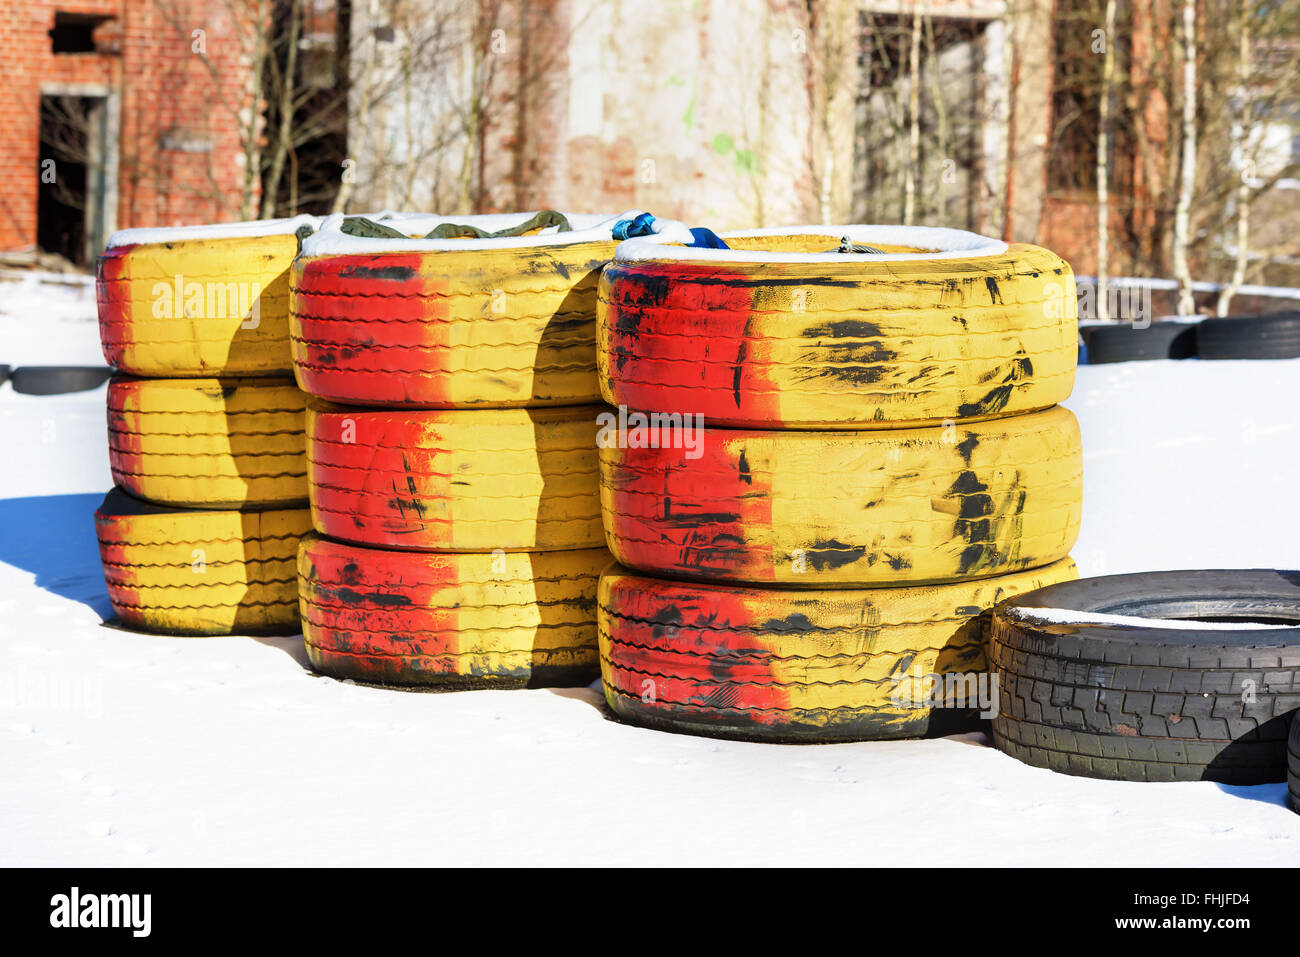 Three stacks of red and yellow painted car tires on the turn of a karting racing track. Some snow cover the track and industrial Stock Photo